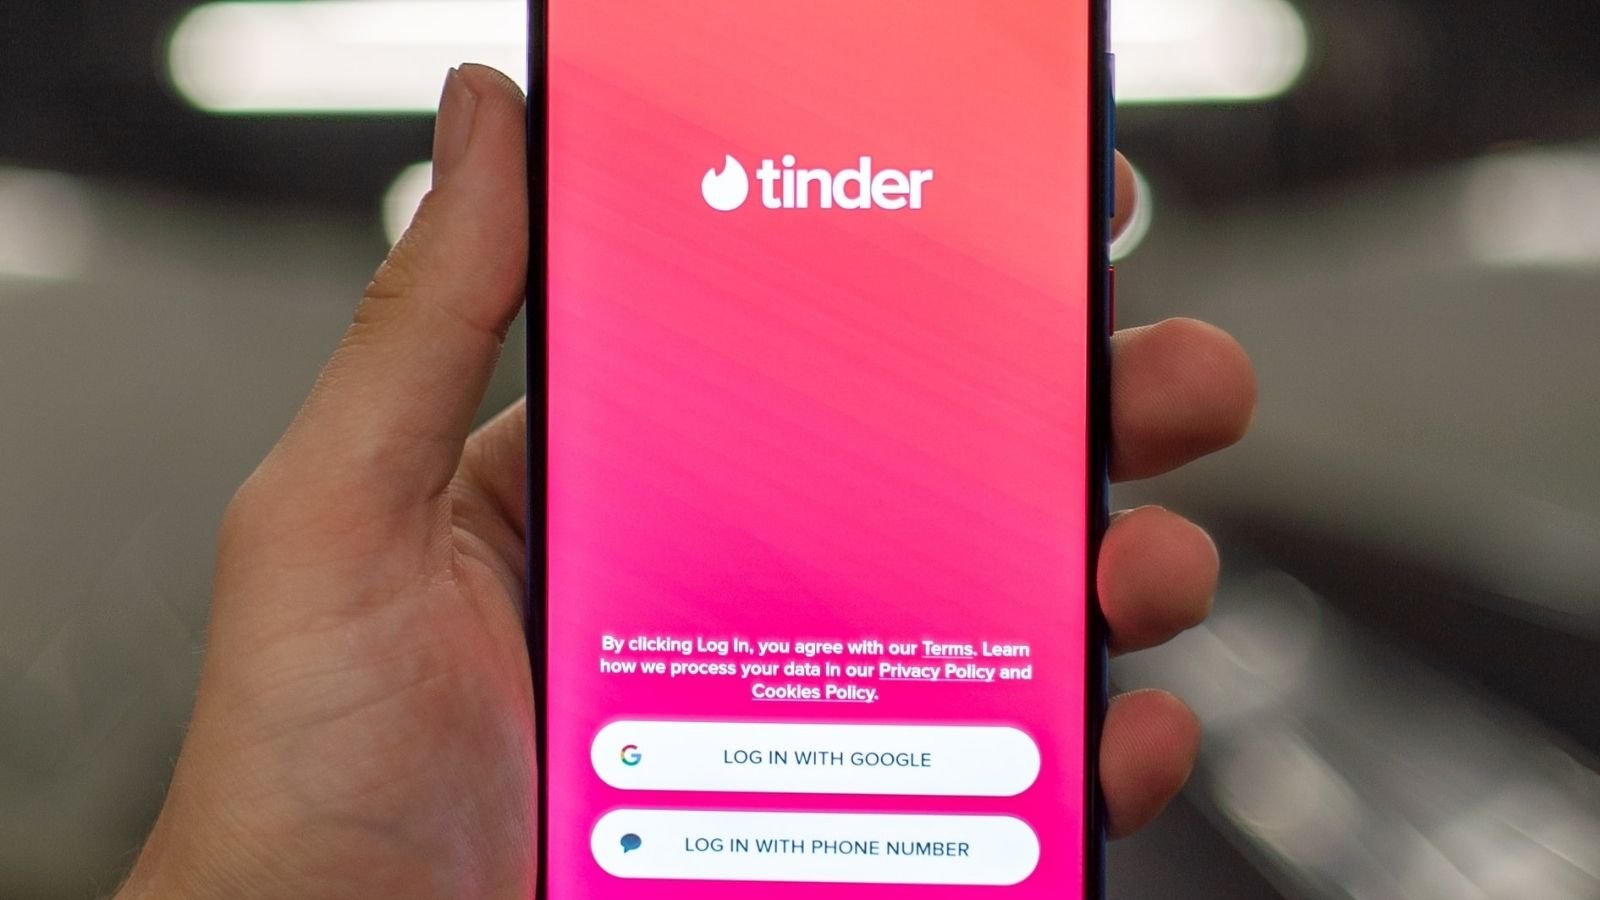 In tinder sign How to